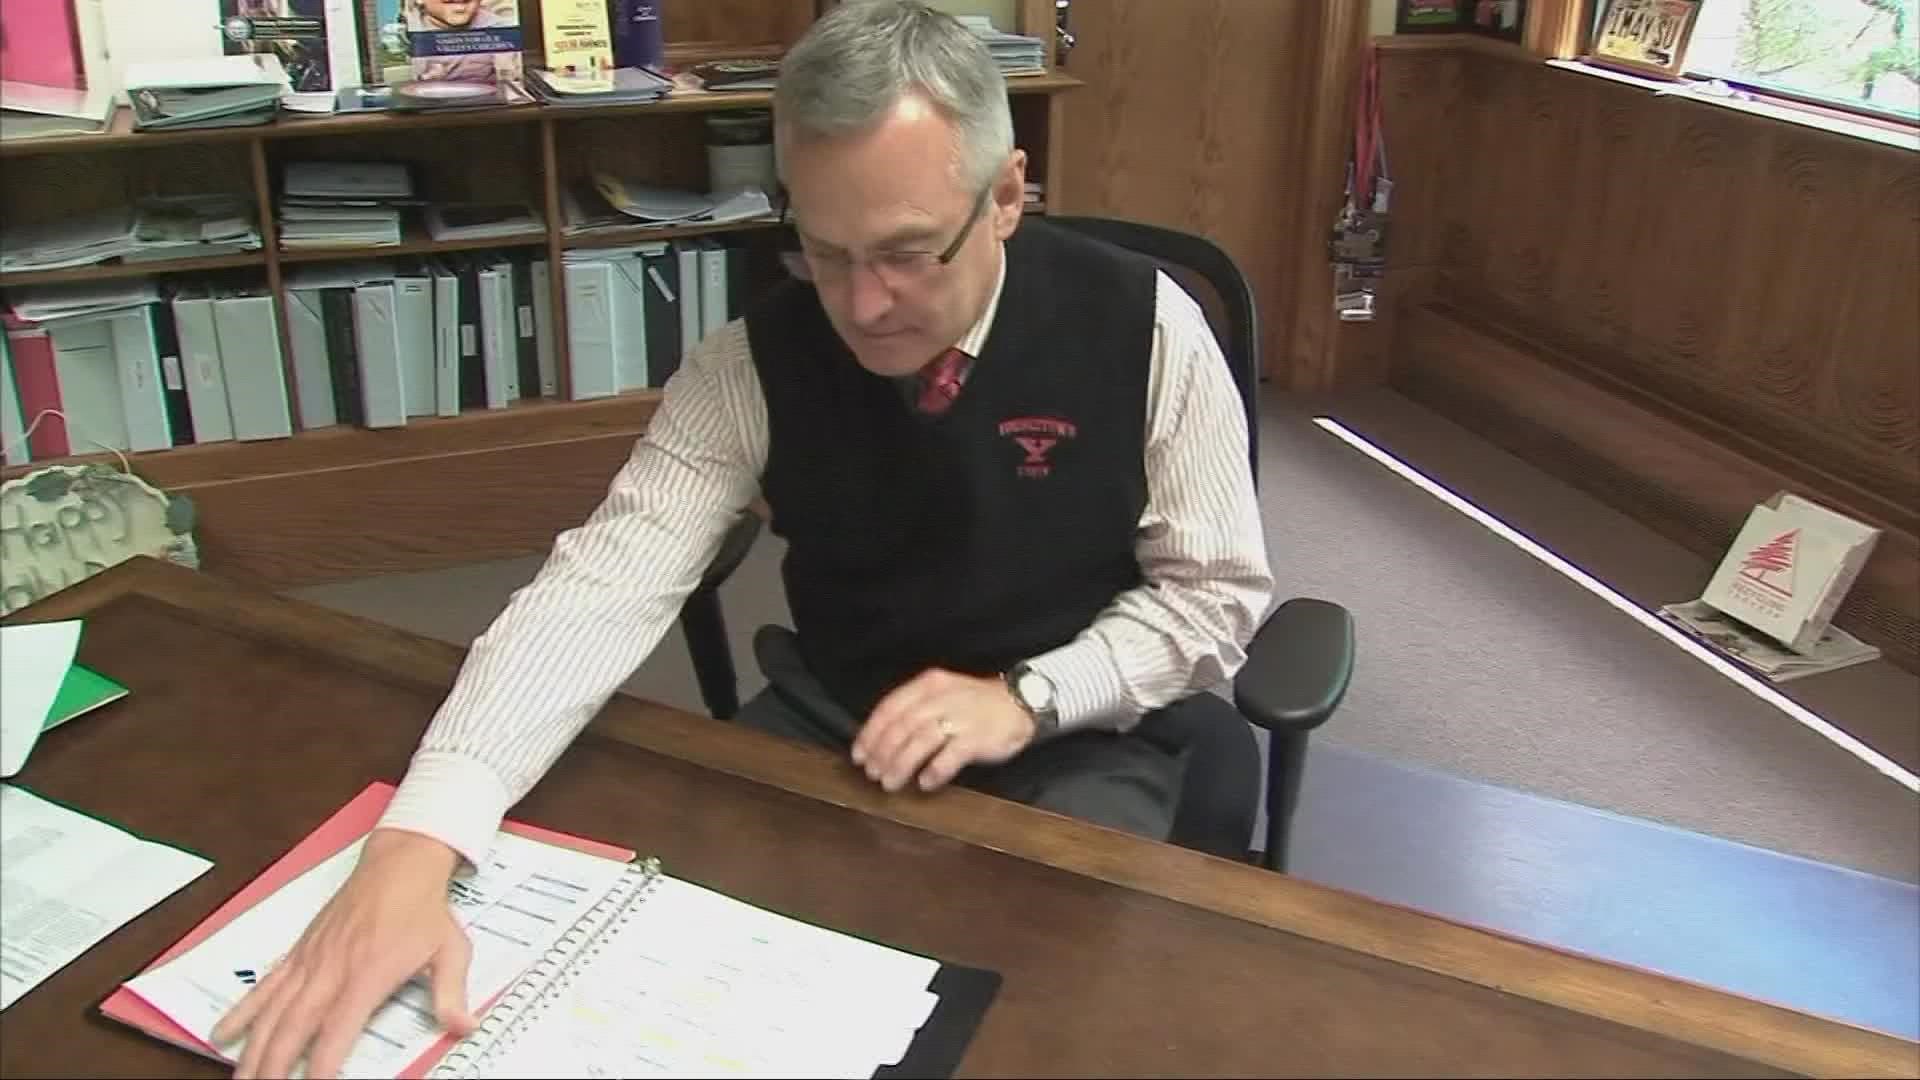 Youngstown State University has announced that Jim Tressel will step down as president effective on February 1, 2023.